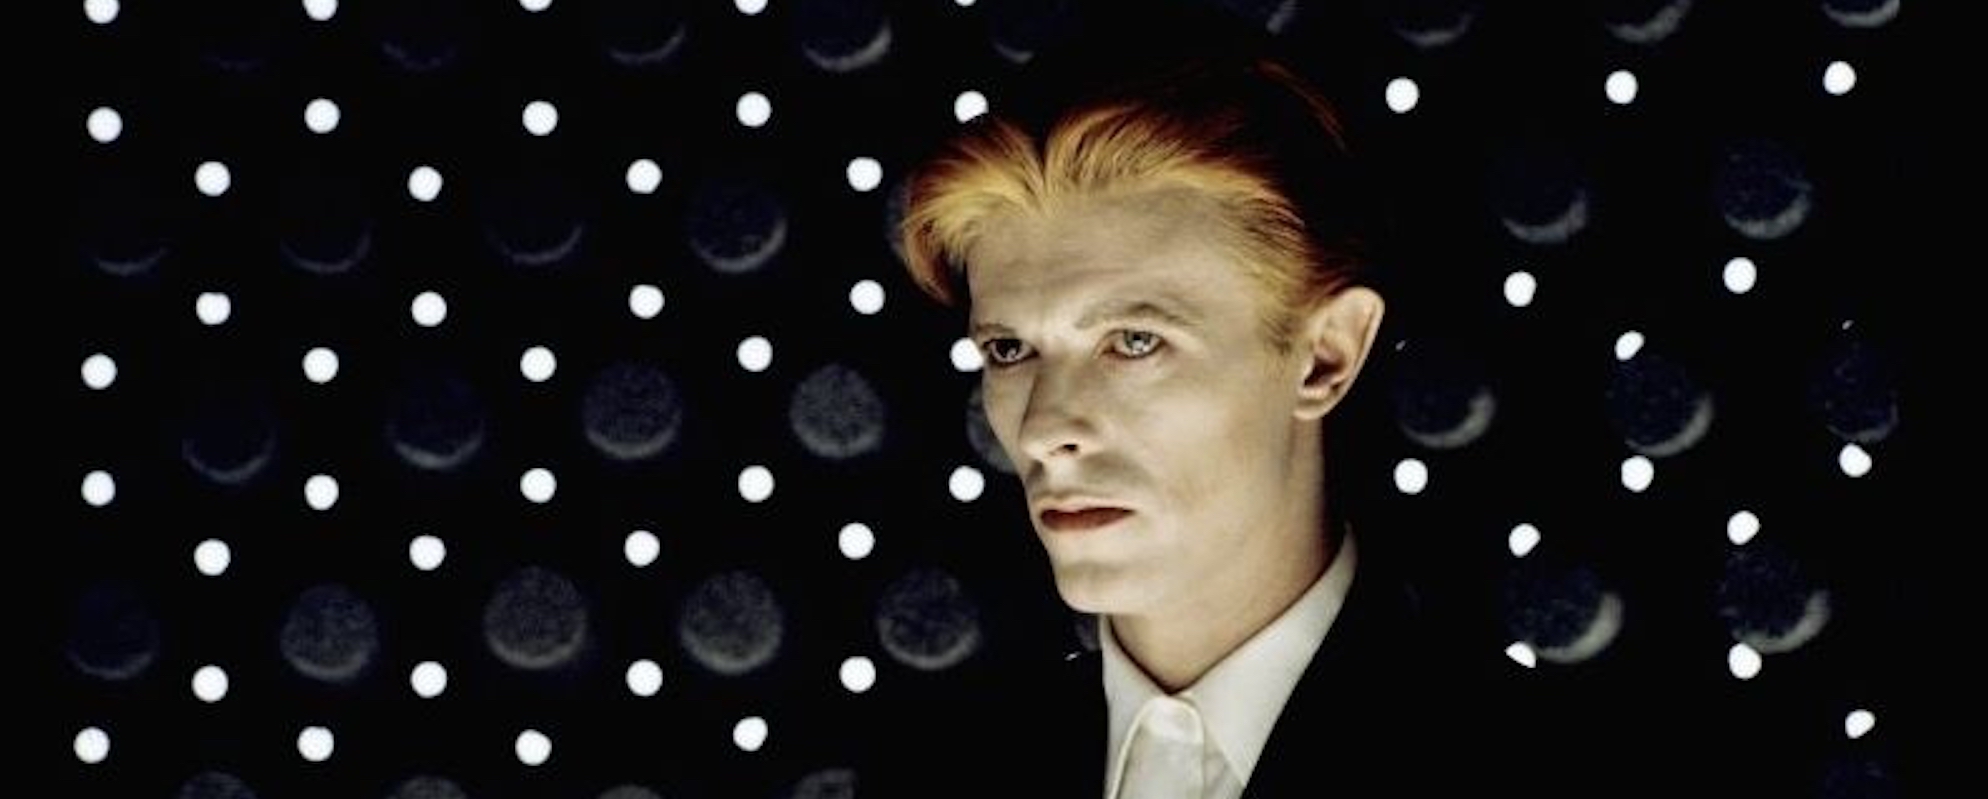 5 Songs You Didn’t Know Featured David Bowie